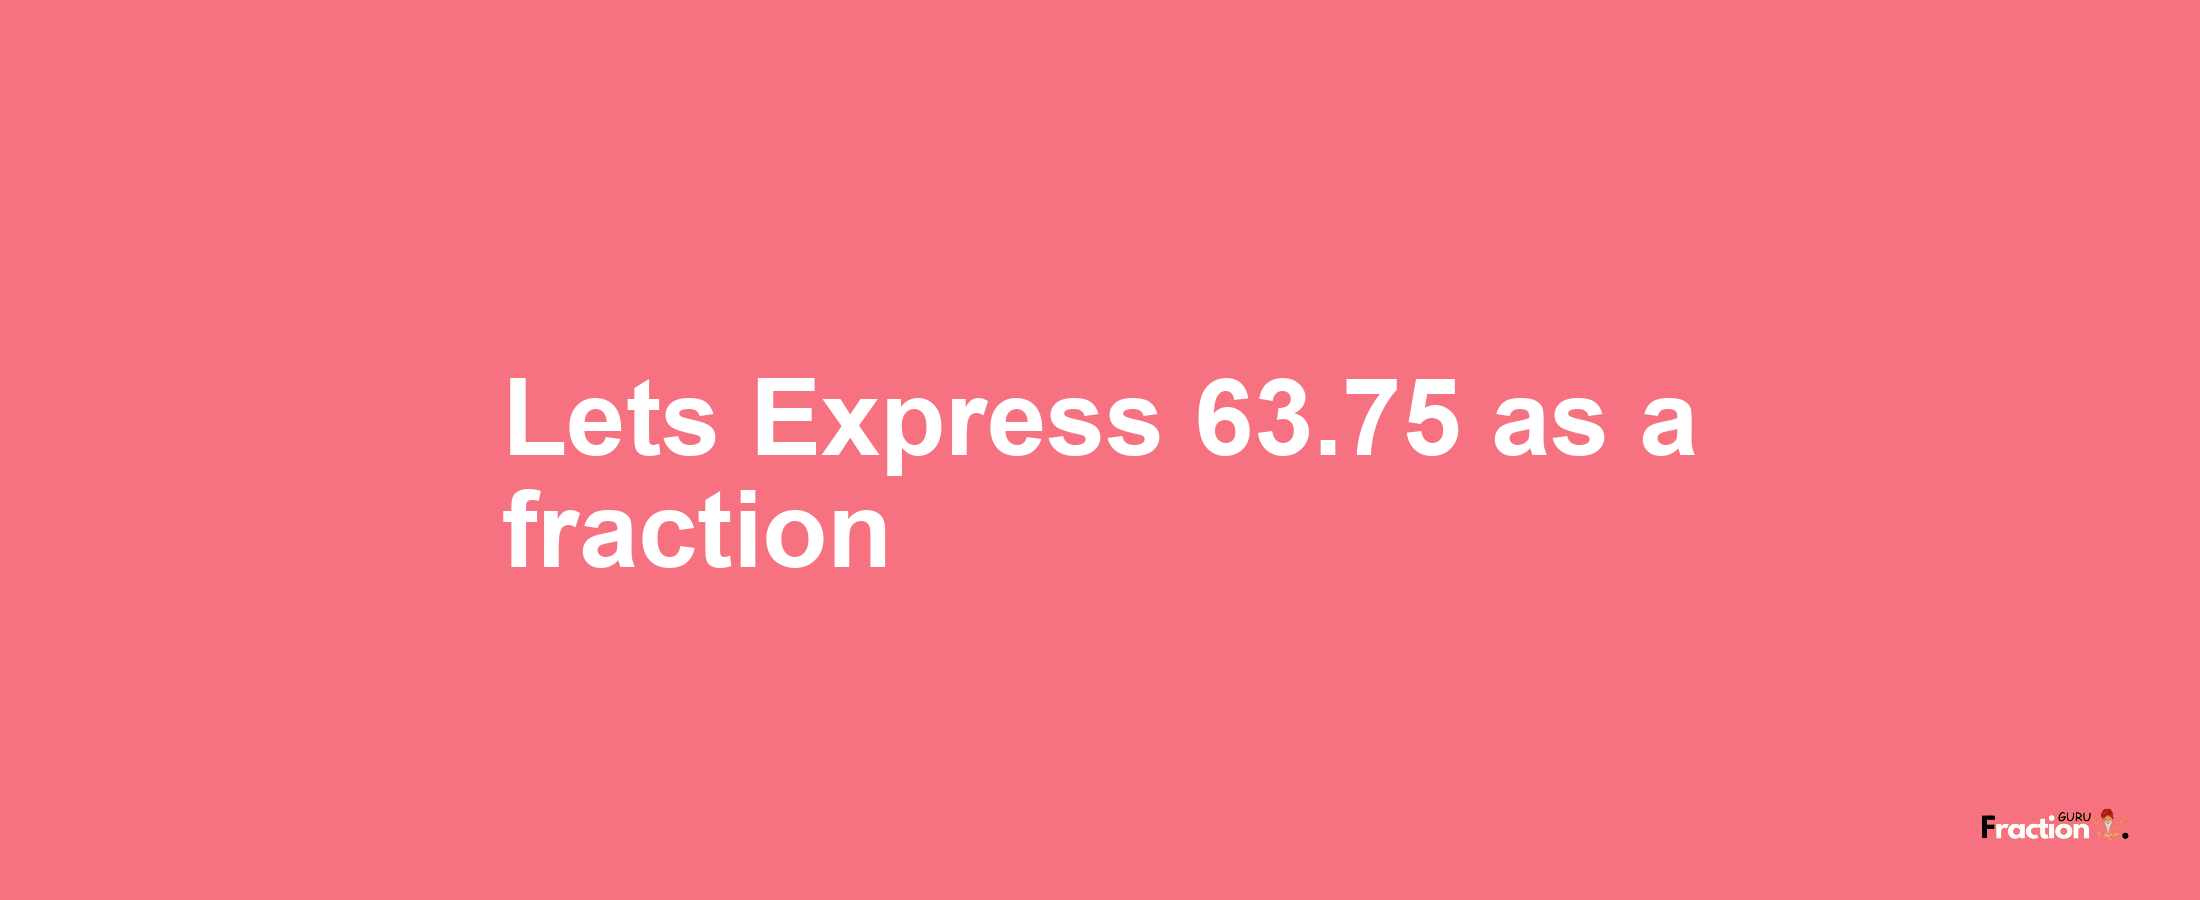 Lets Express 63.75 as afraction